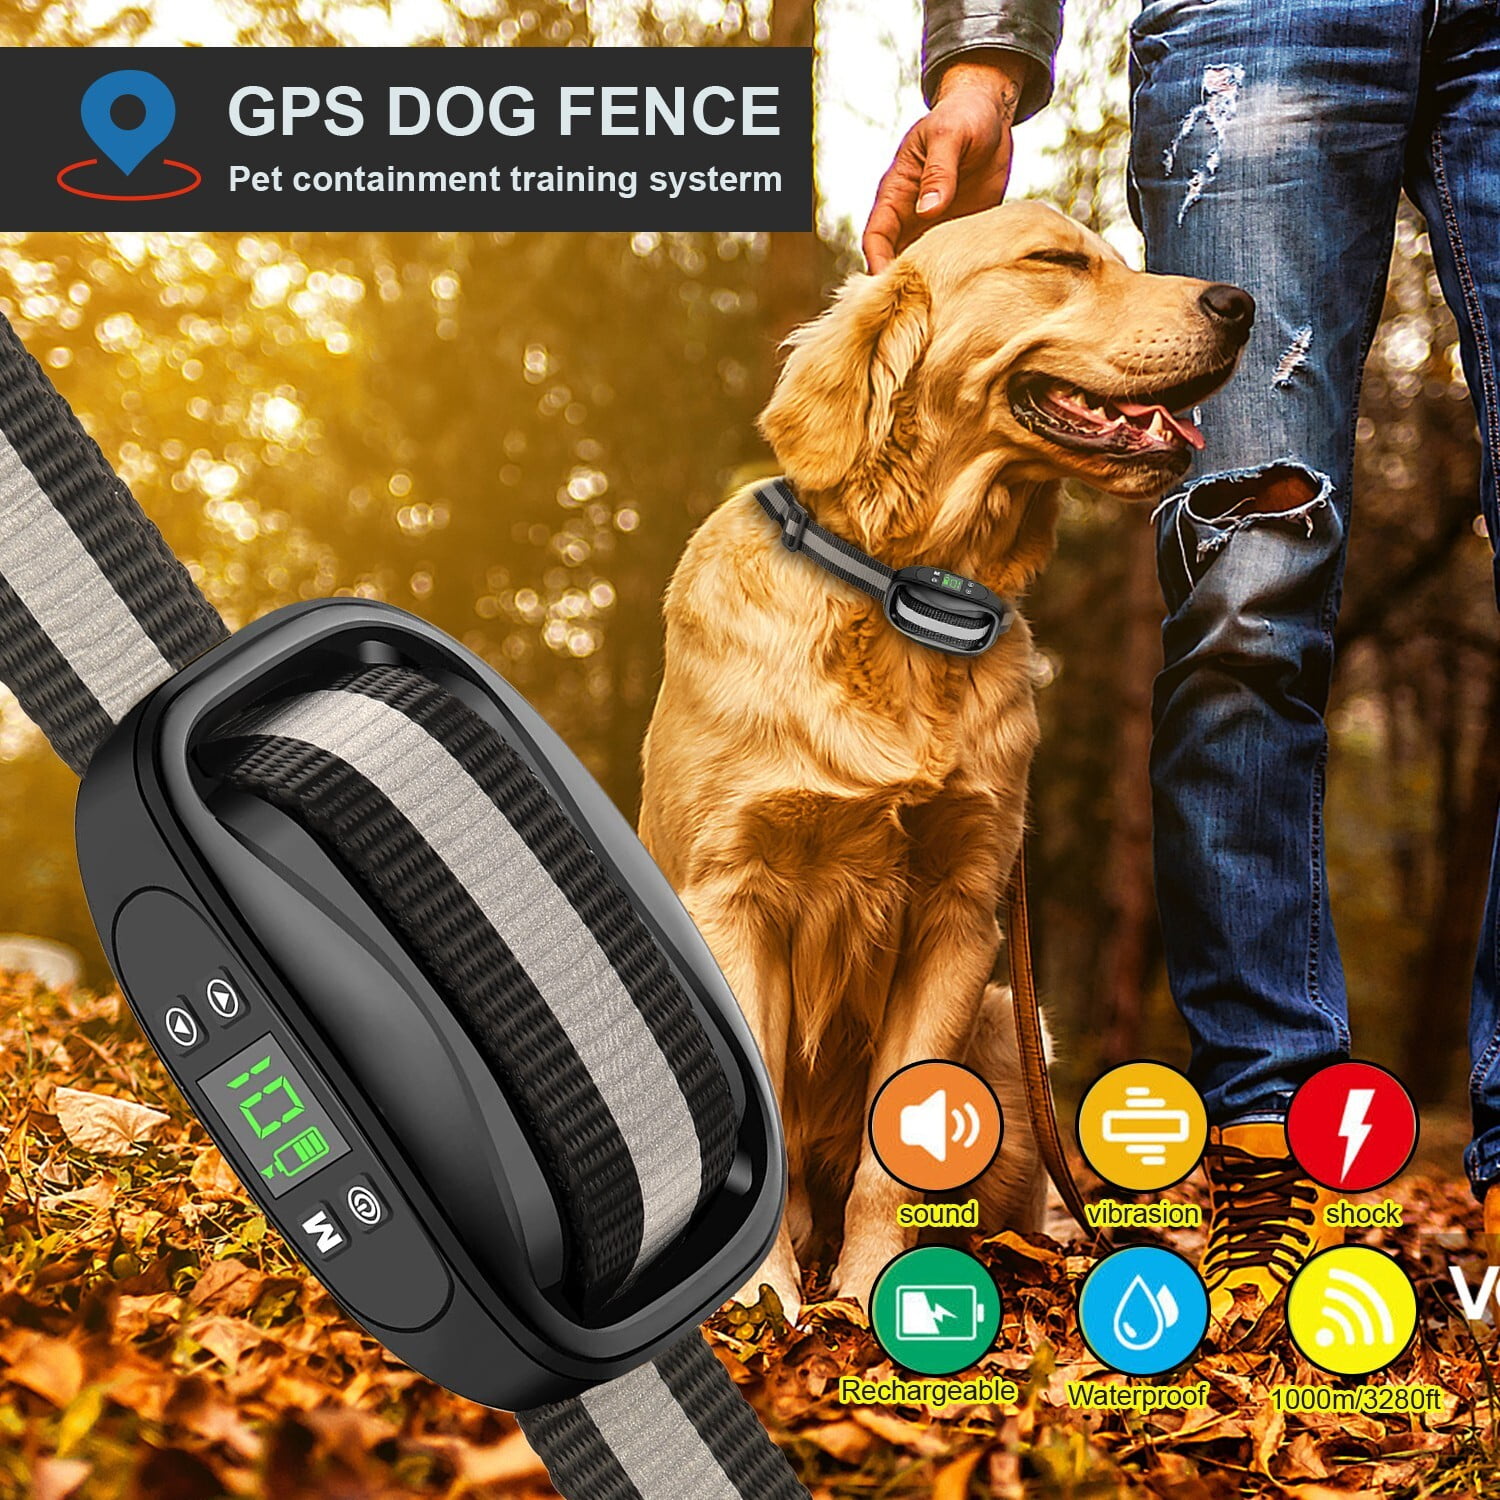 GPS Wireless Dog Fence, Pet Containment System, Pet Training Range 98-3380 ft, Adjustable Warning Strength, Rechargeable for All Medium and Dogs Walmart.com